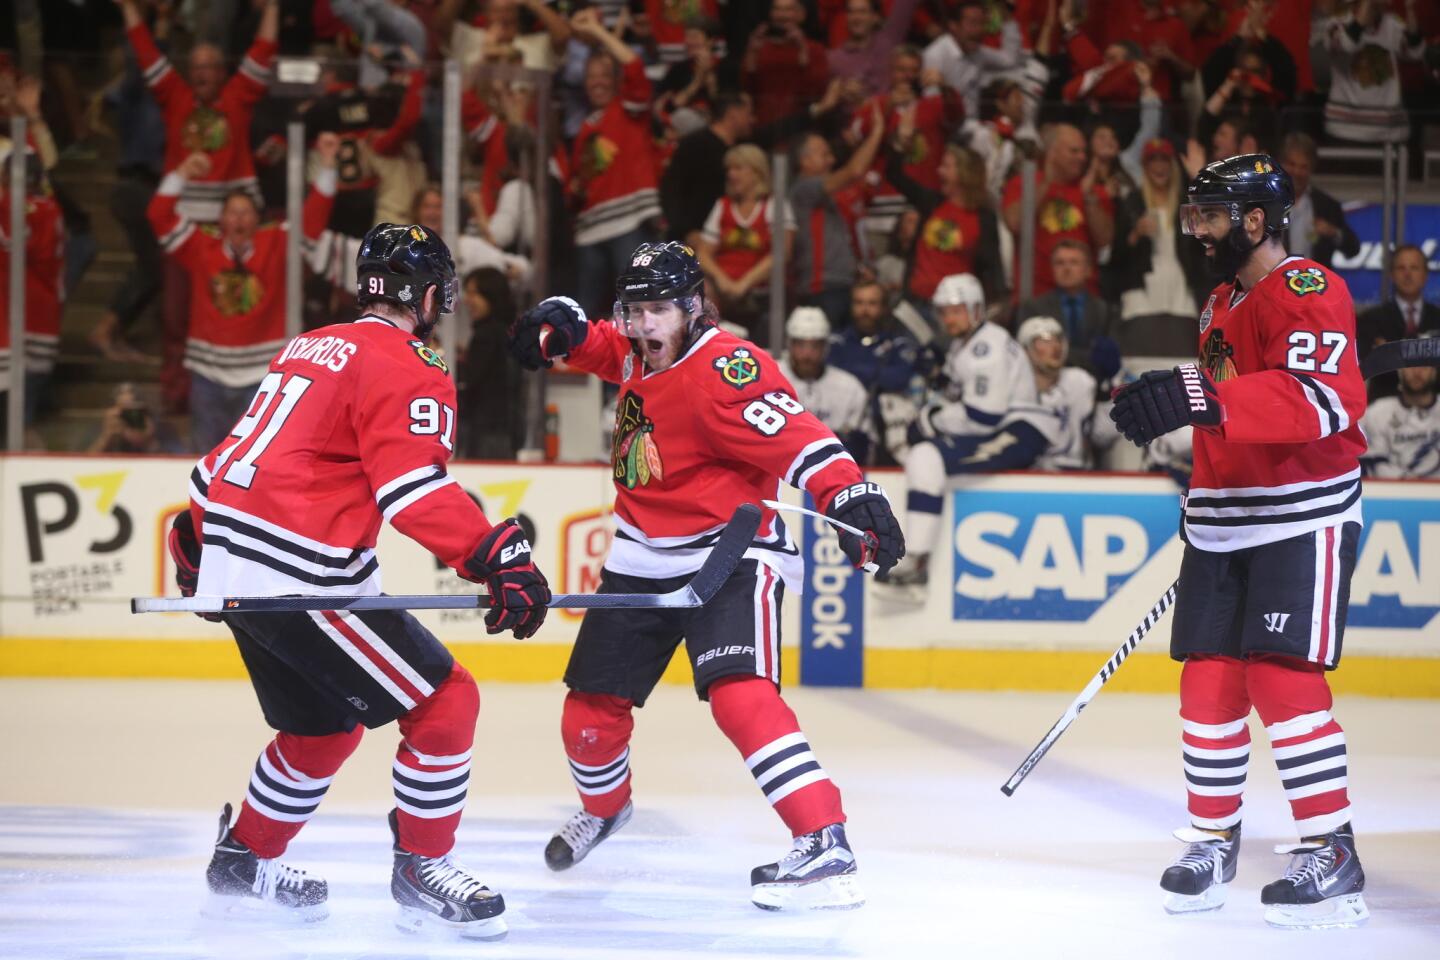 Patrick Kane scores in the third period goal in the Blackhawks' 2-0 win over the Lightning.